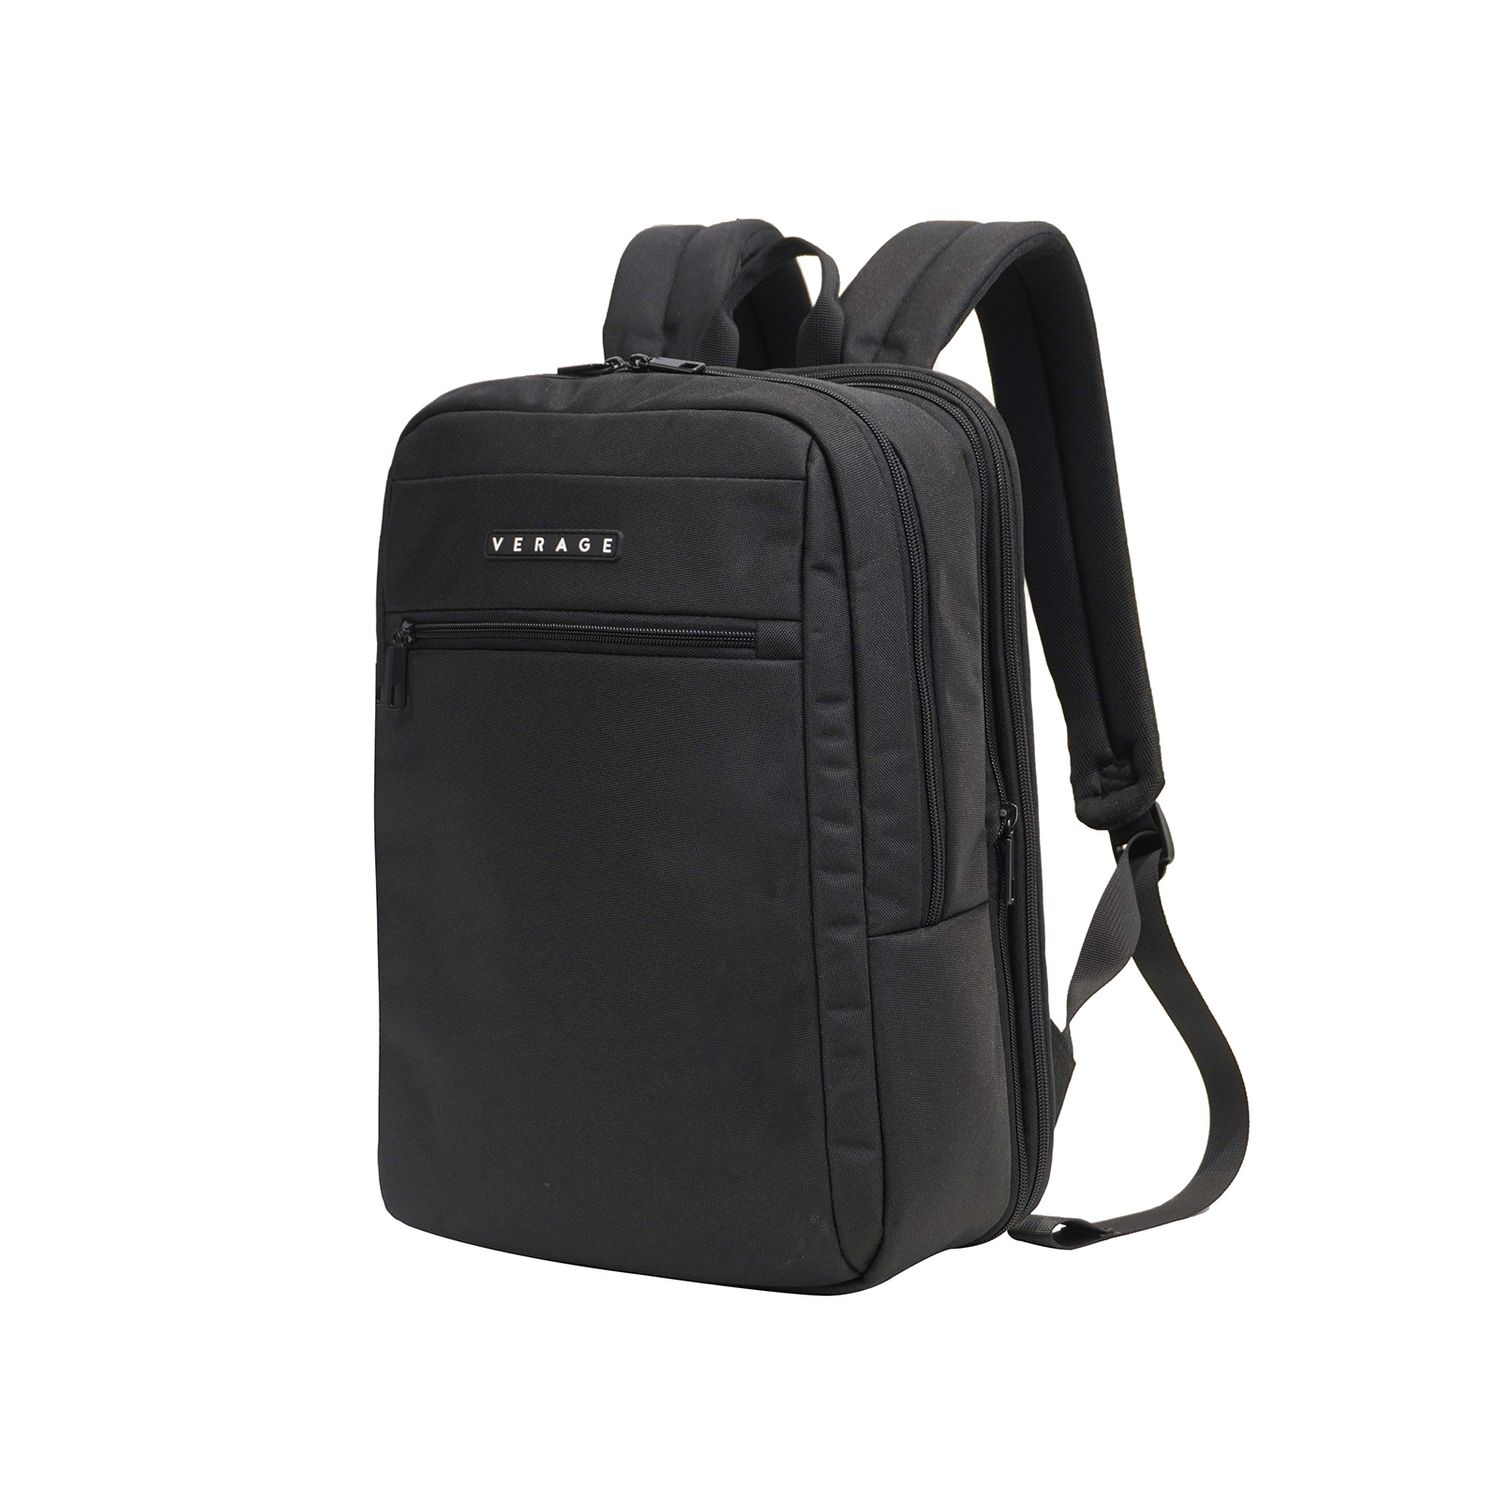 Light weight travel backpack